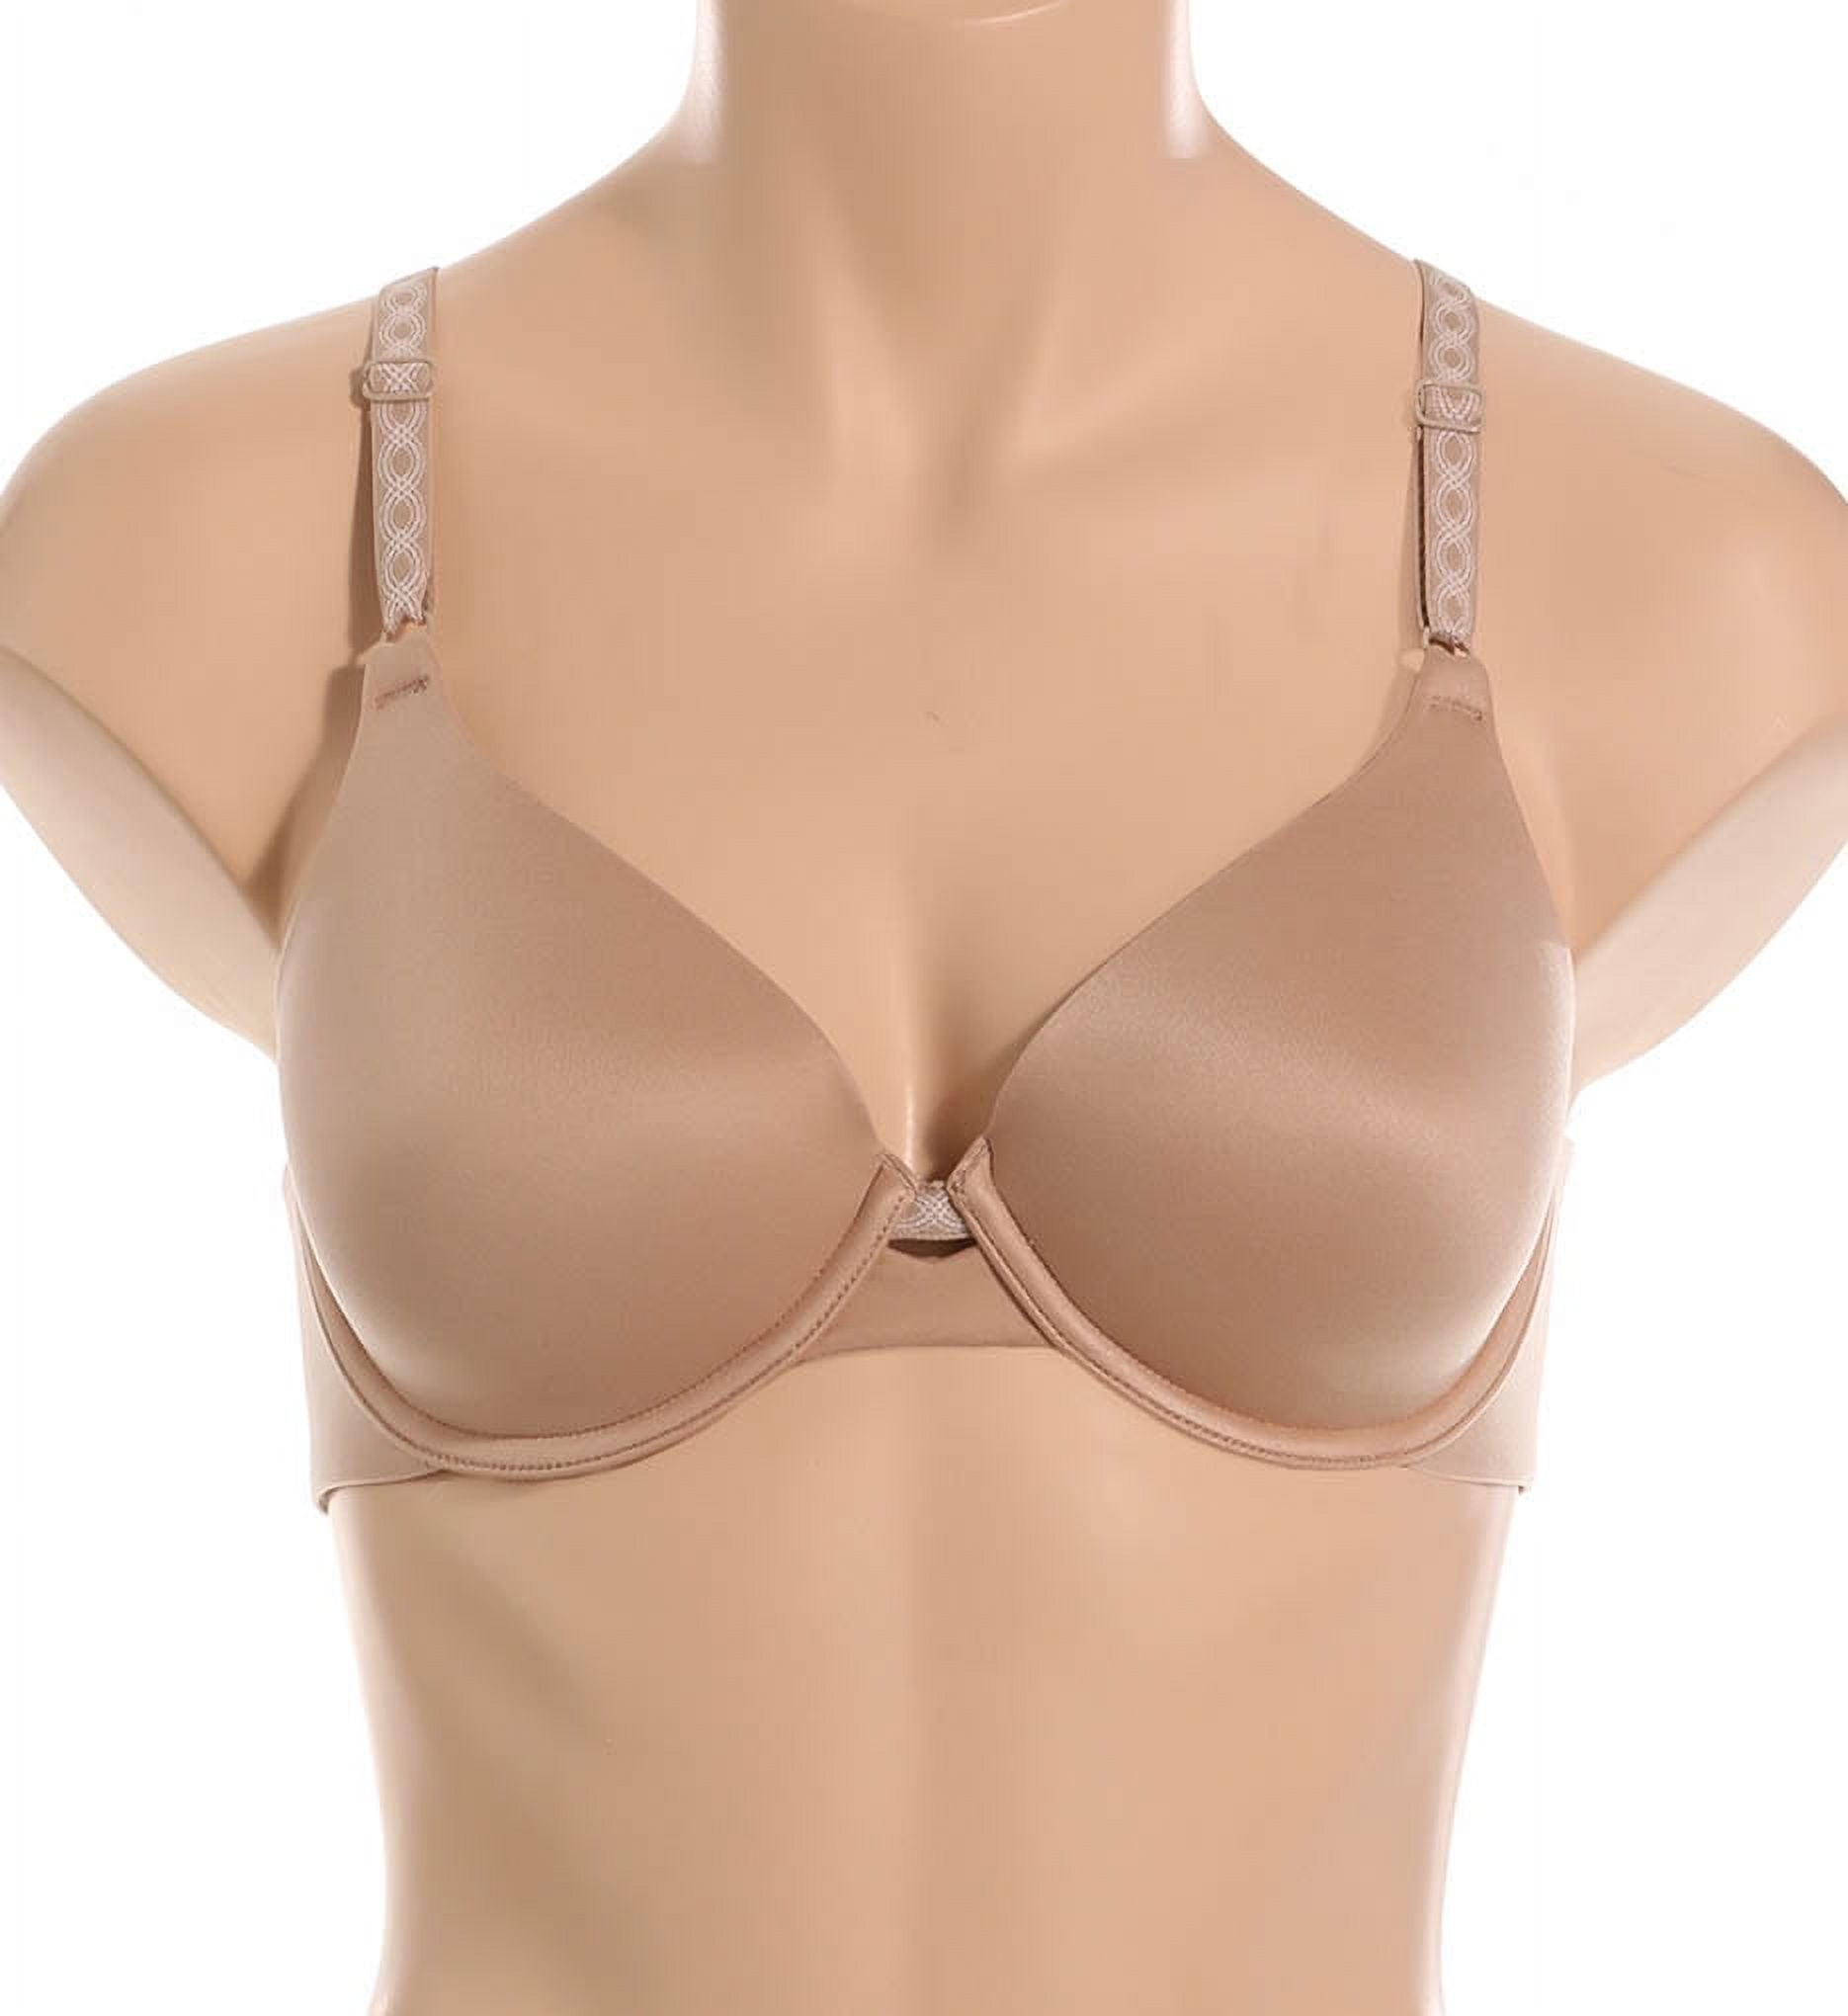 Women's Warner's RB1691A Cloud 9 Underwire Contour Bra (Toasted